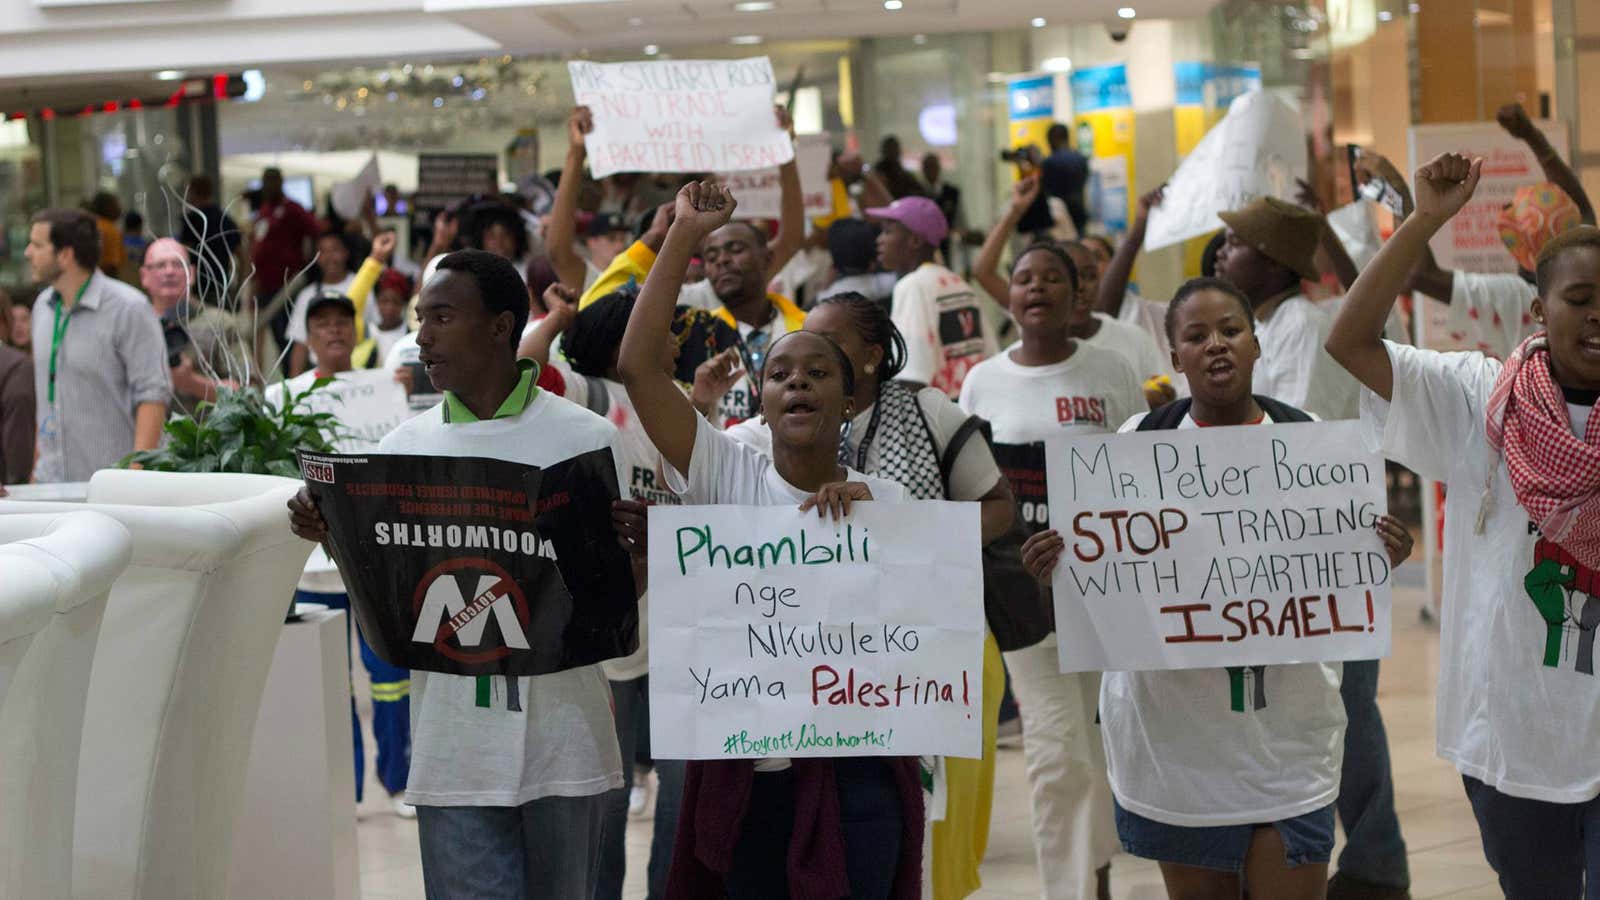 Protestors in Johannesburg call for a boycott of Woolworths supermarket.